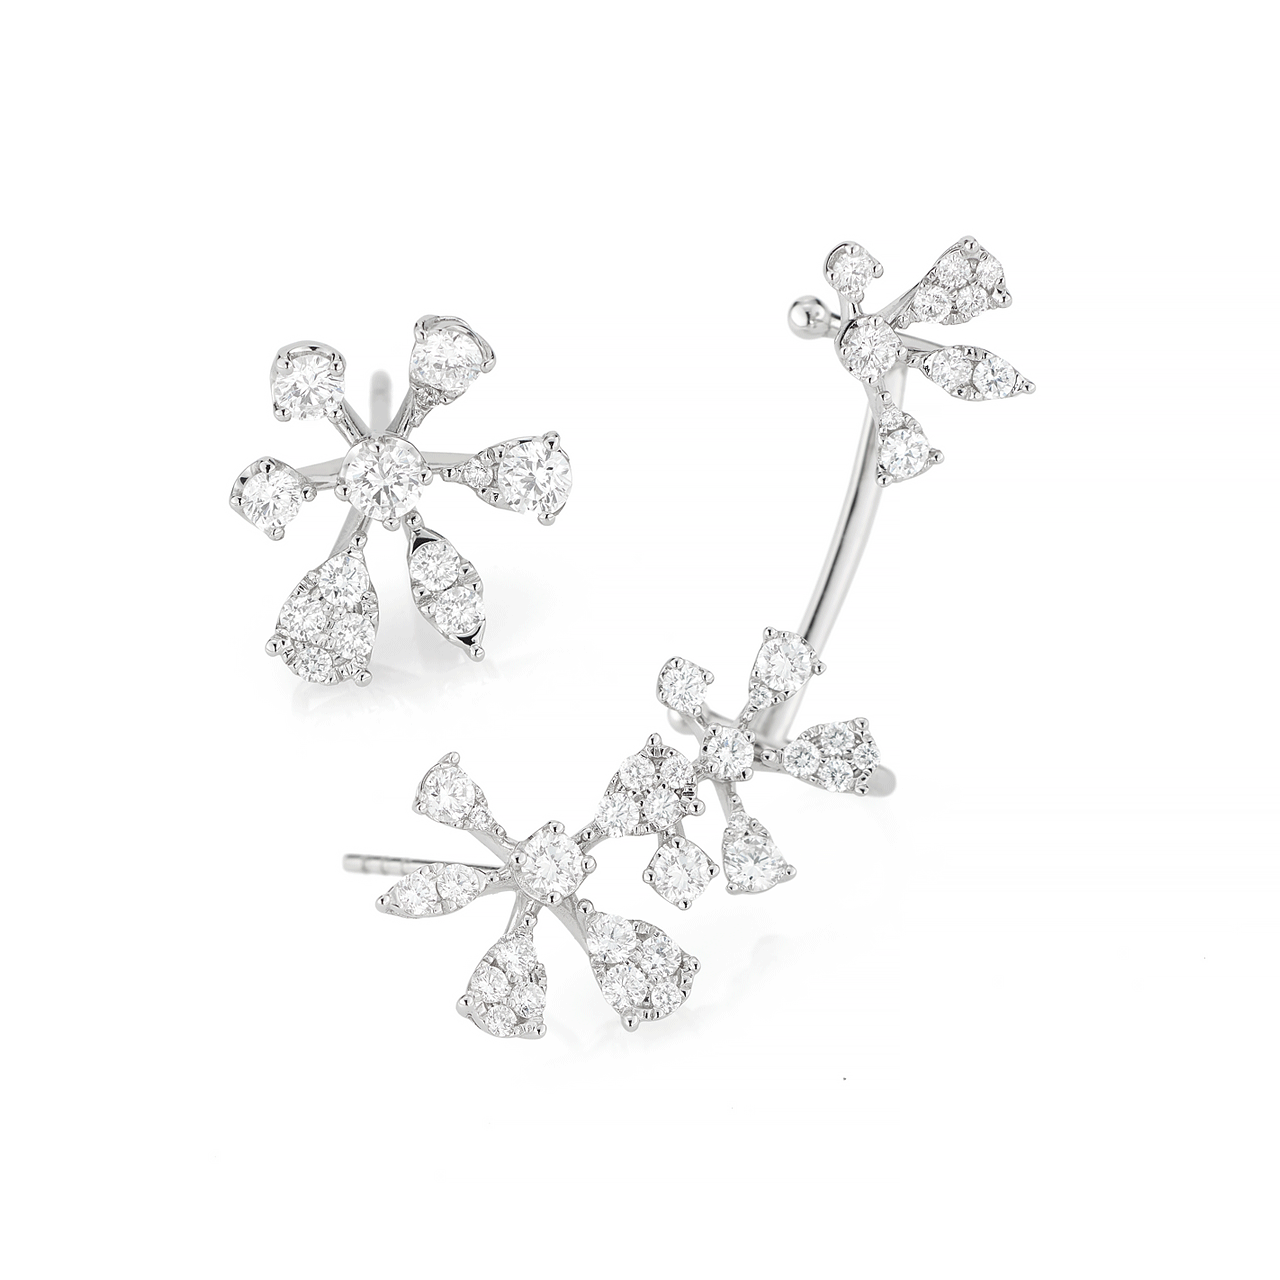 14K Gold and Diamond Flower Ear Climber and Stud